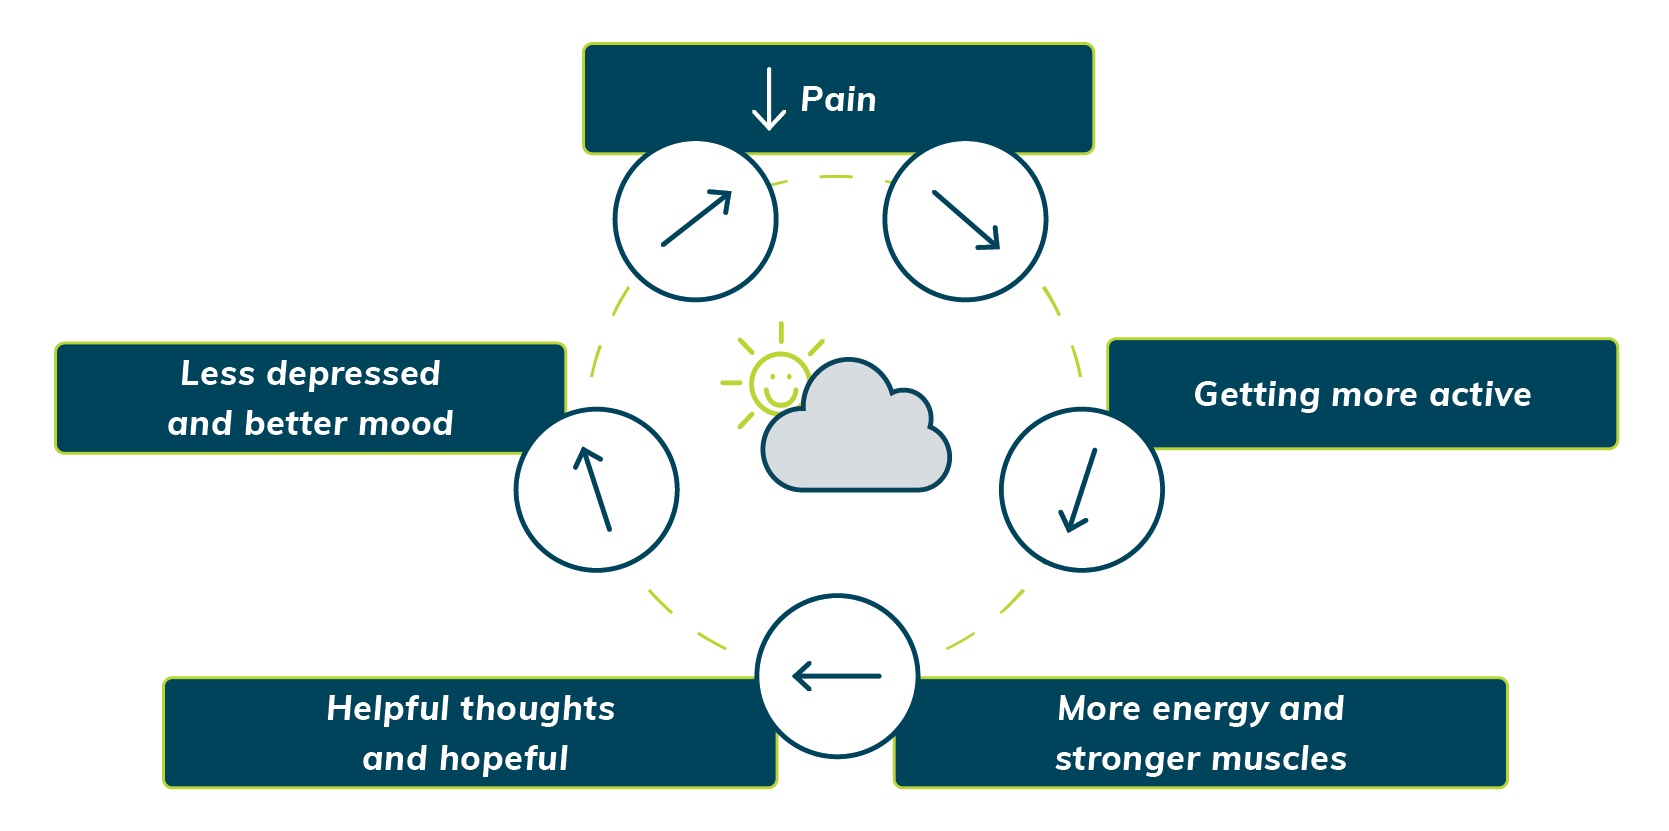 Turning around the cycle of depression describes the interactive relationship between less pain, being more active and having less rest, more energy, and stronger muscles, helpful thoughts and hopeful, and less depressed and better mood.